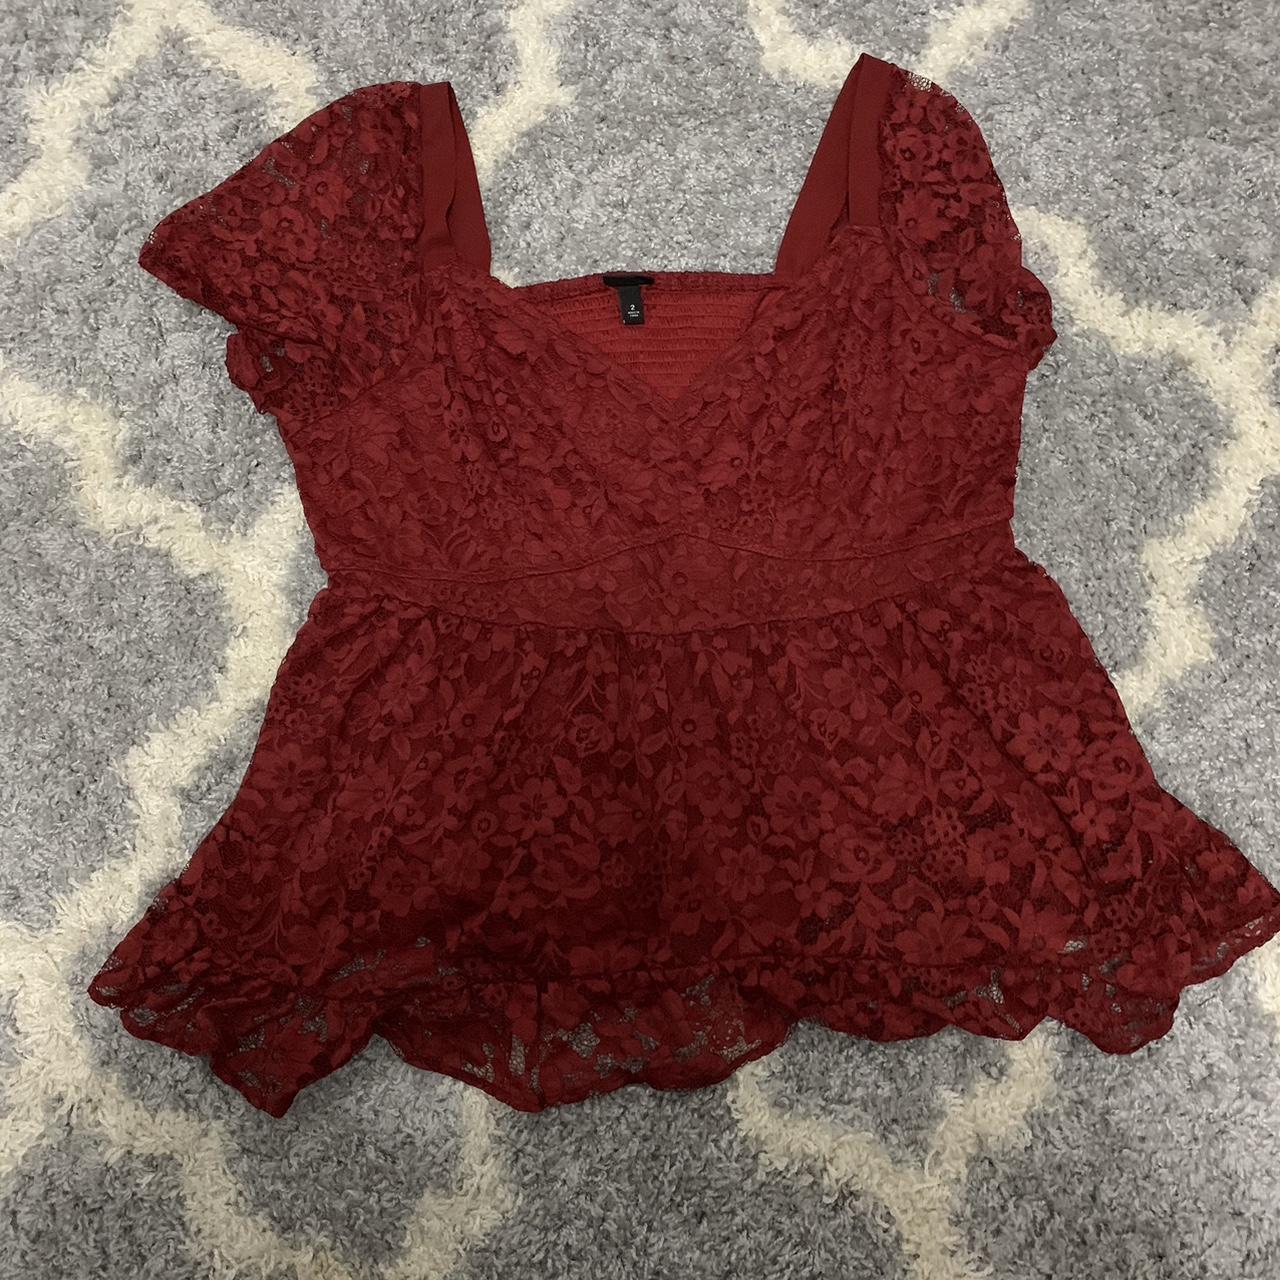 item listed by luvs2thrift